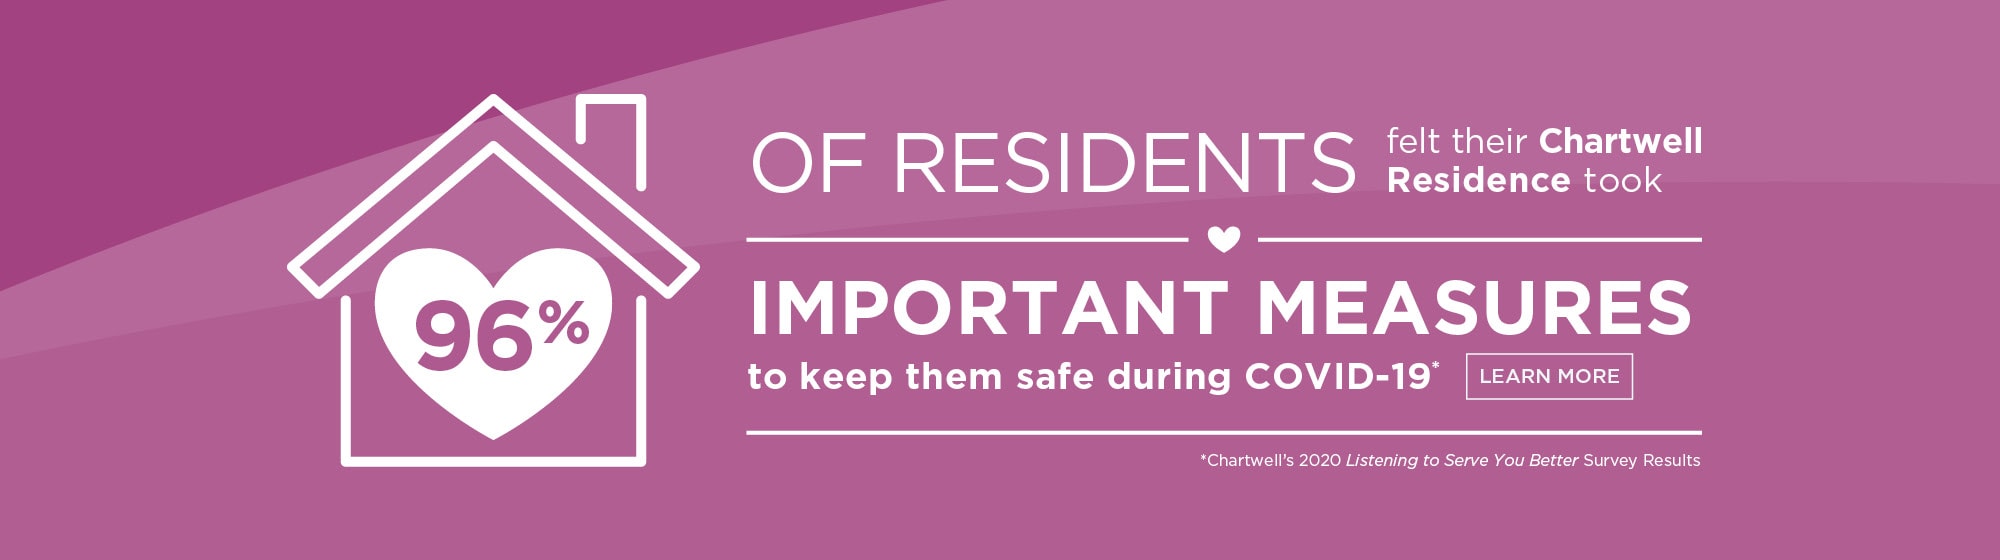 96% of residents felt their Chartwell residence took important measures to keep them safe during COVID-19.